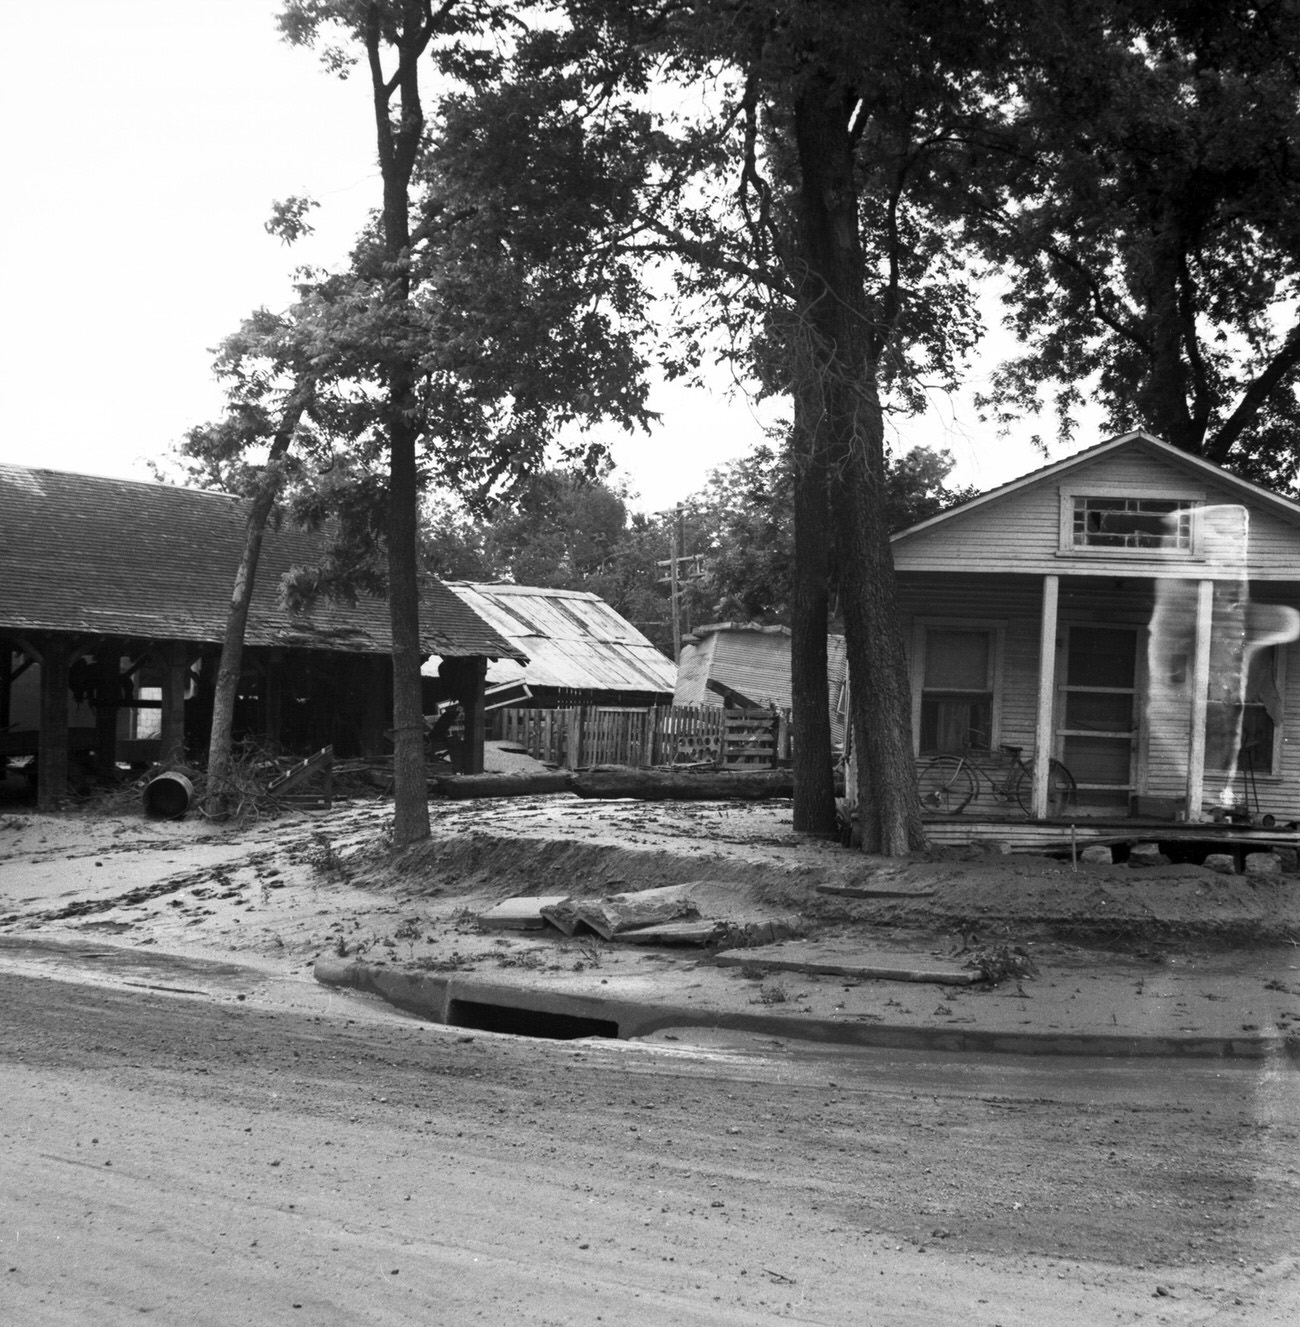 Damaged houses and debris on road from flood, 1949